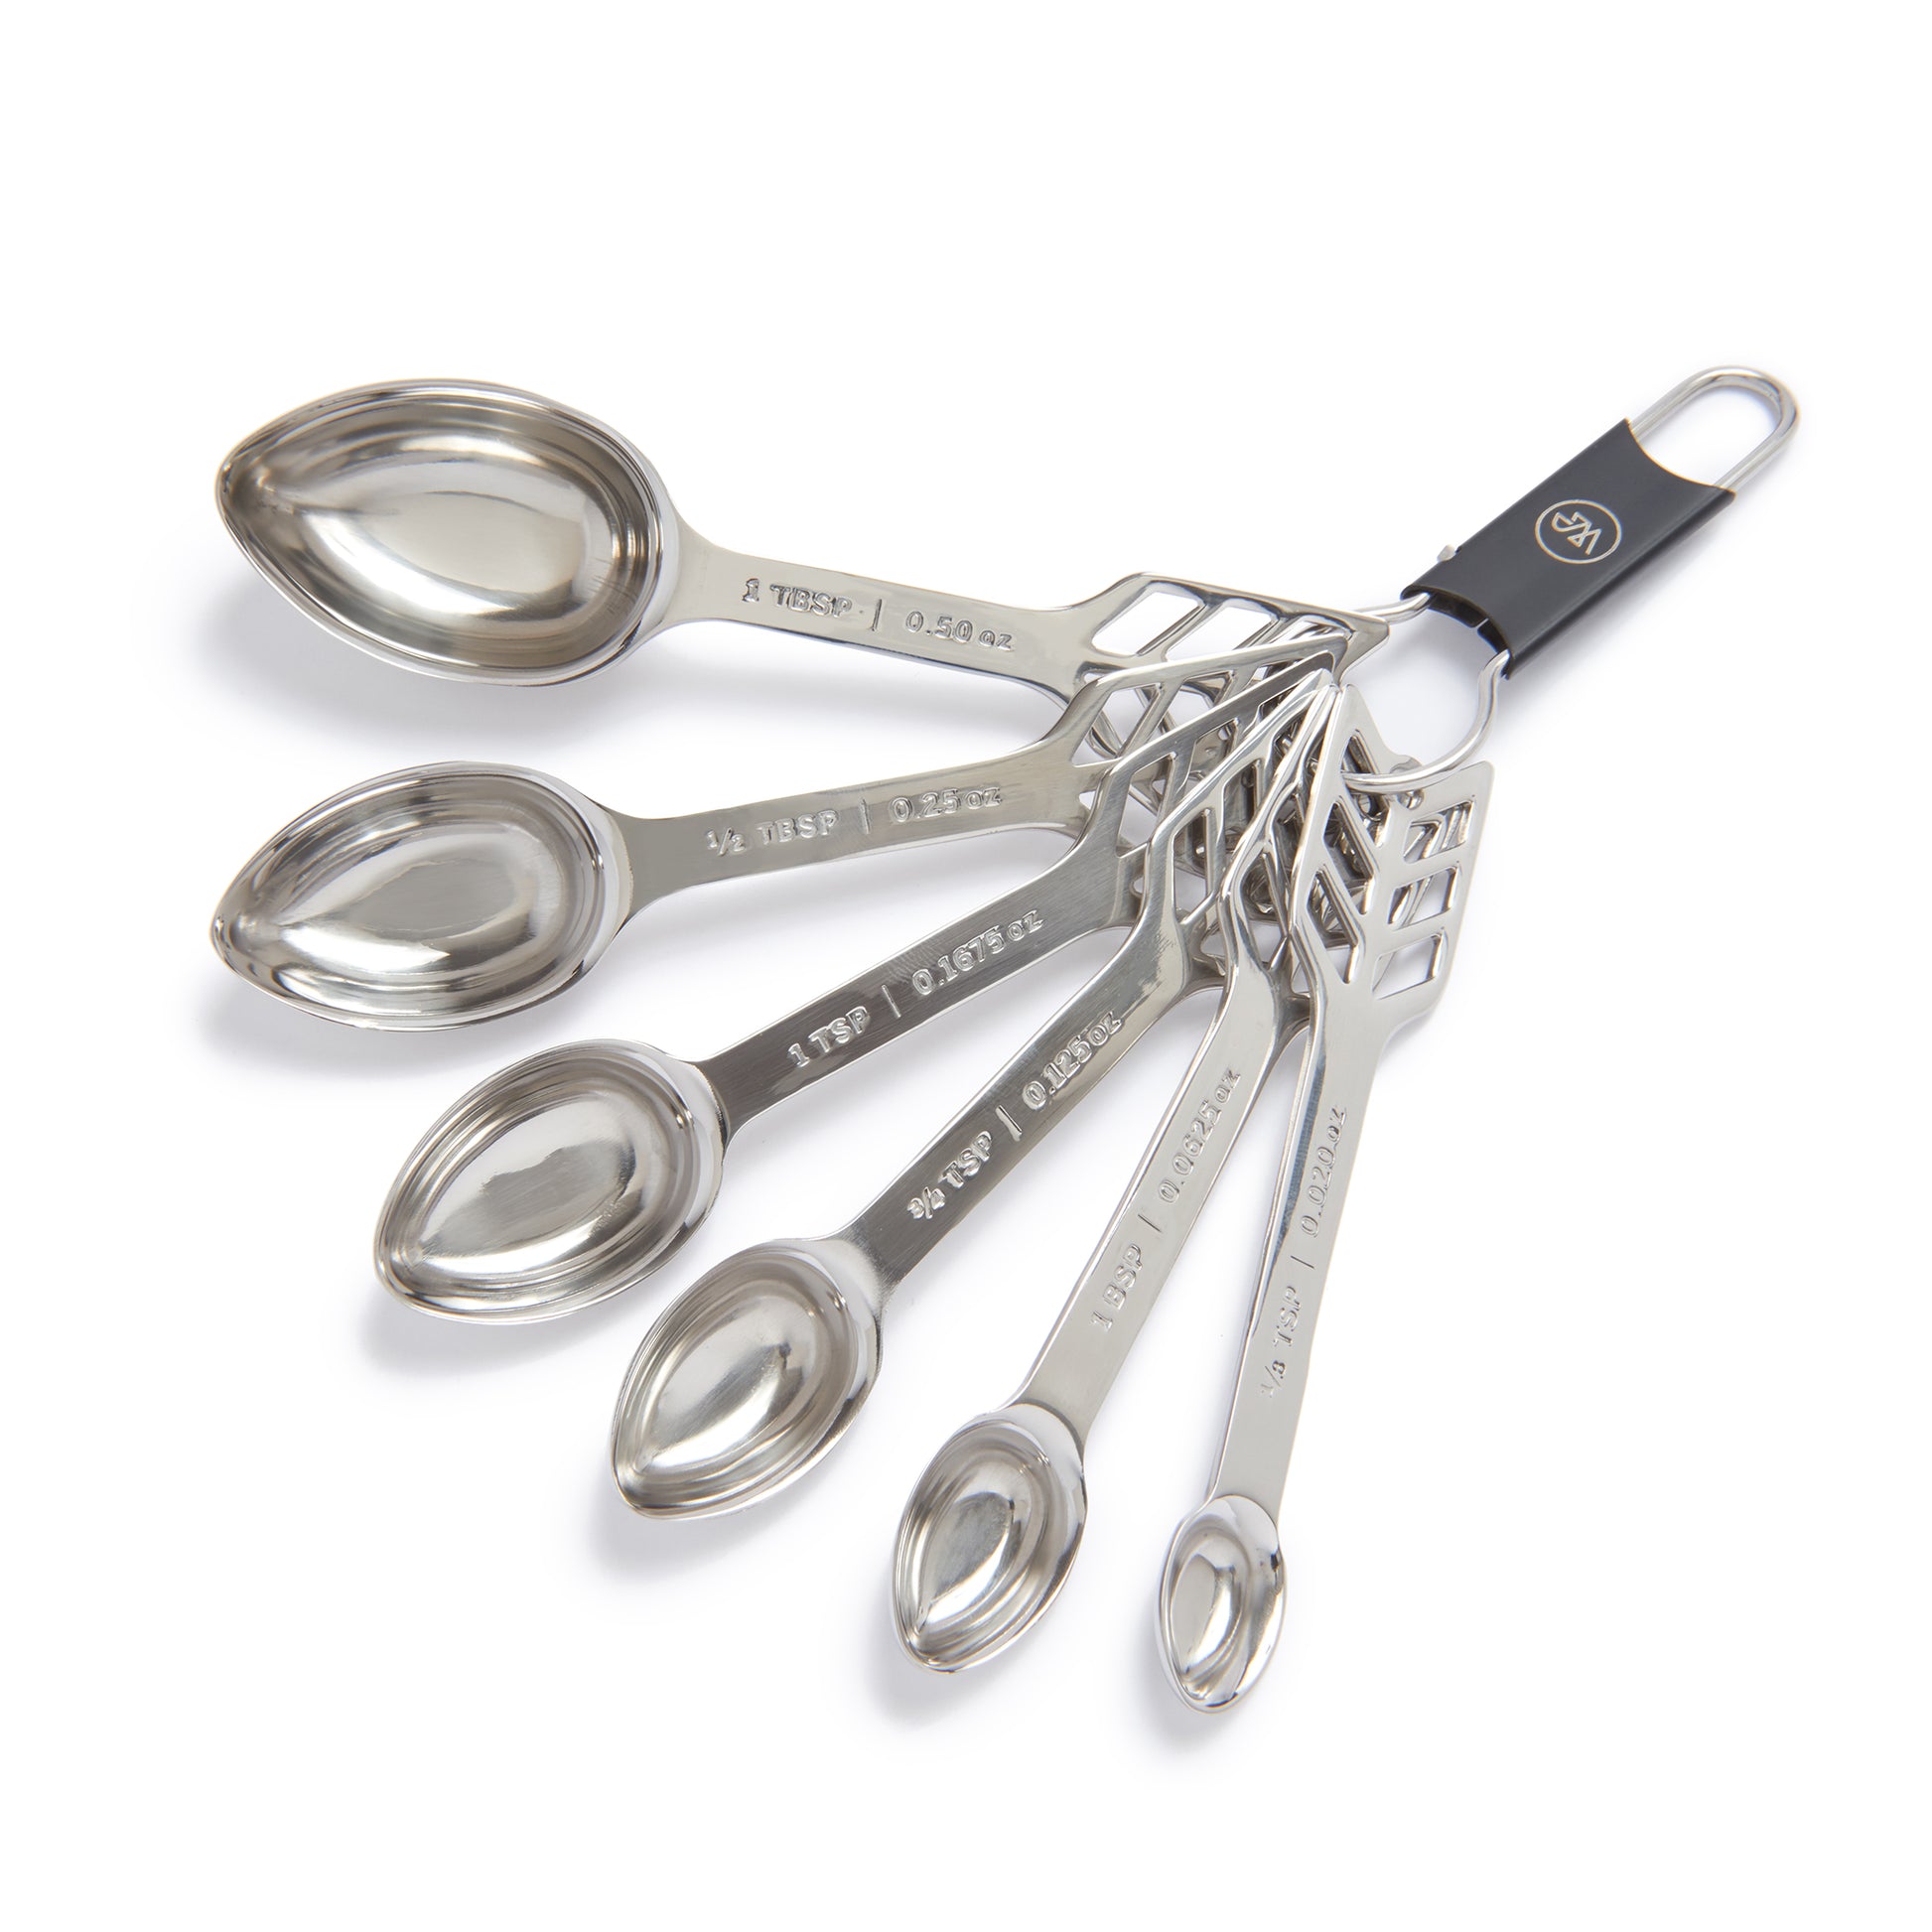 Meehan's Mixology Measuring Spoons